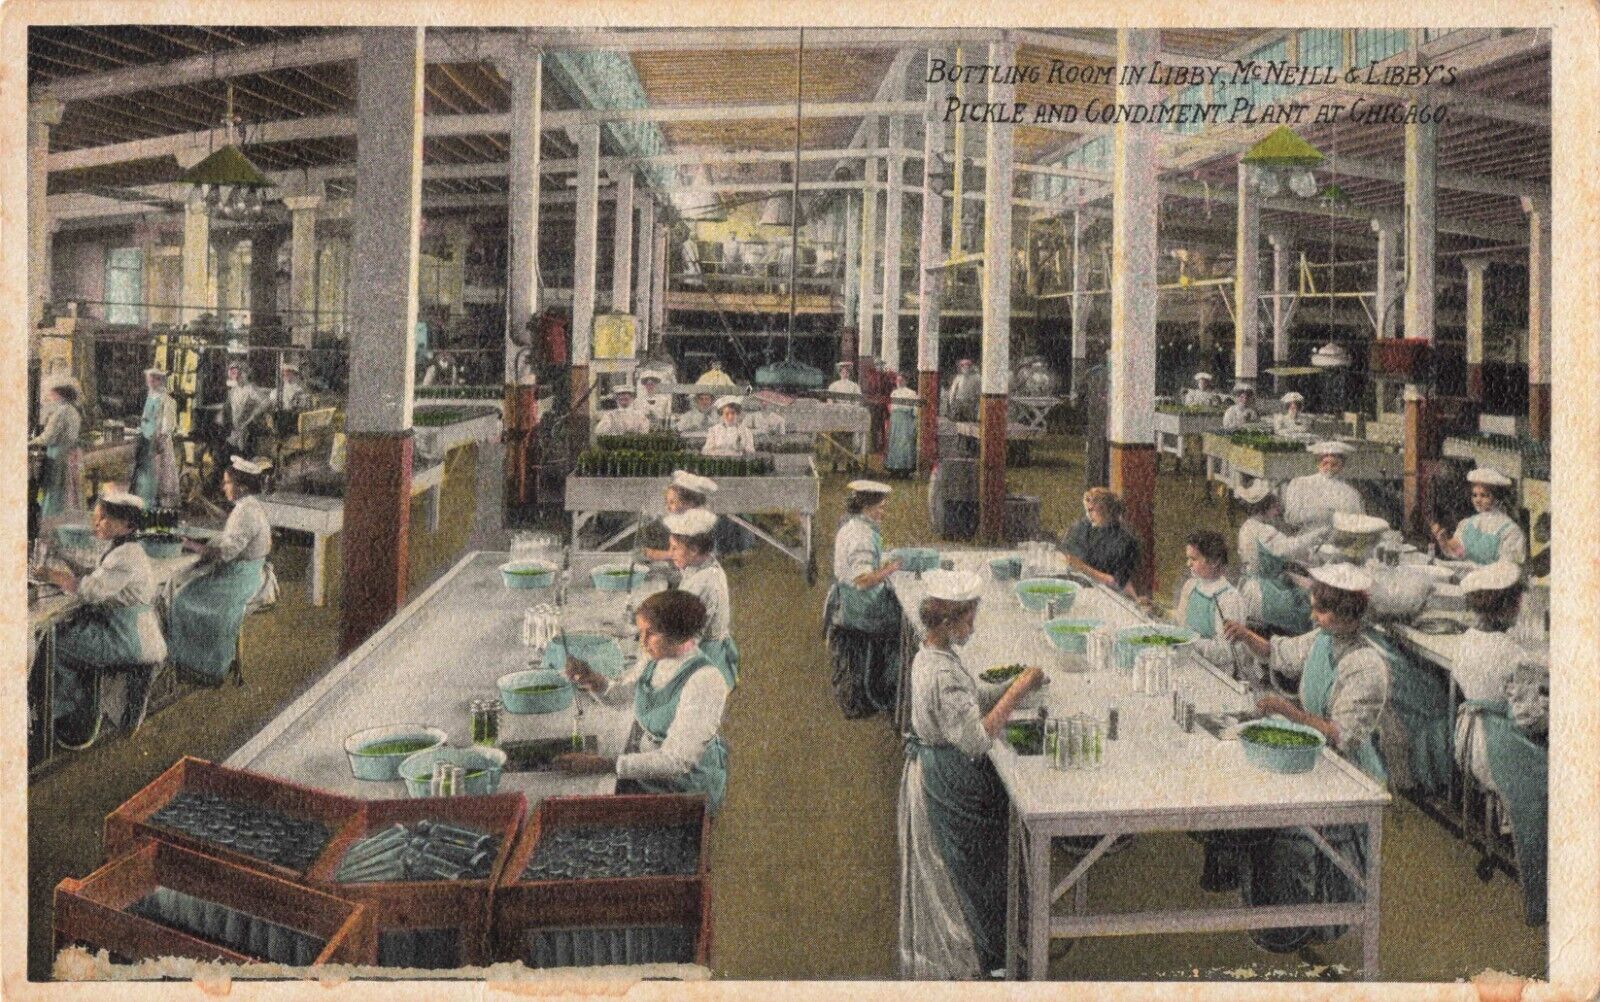 Bottling Room Libby McNeill & Libby's Pickle Plant Chicago Illinois c1920s PC